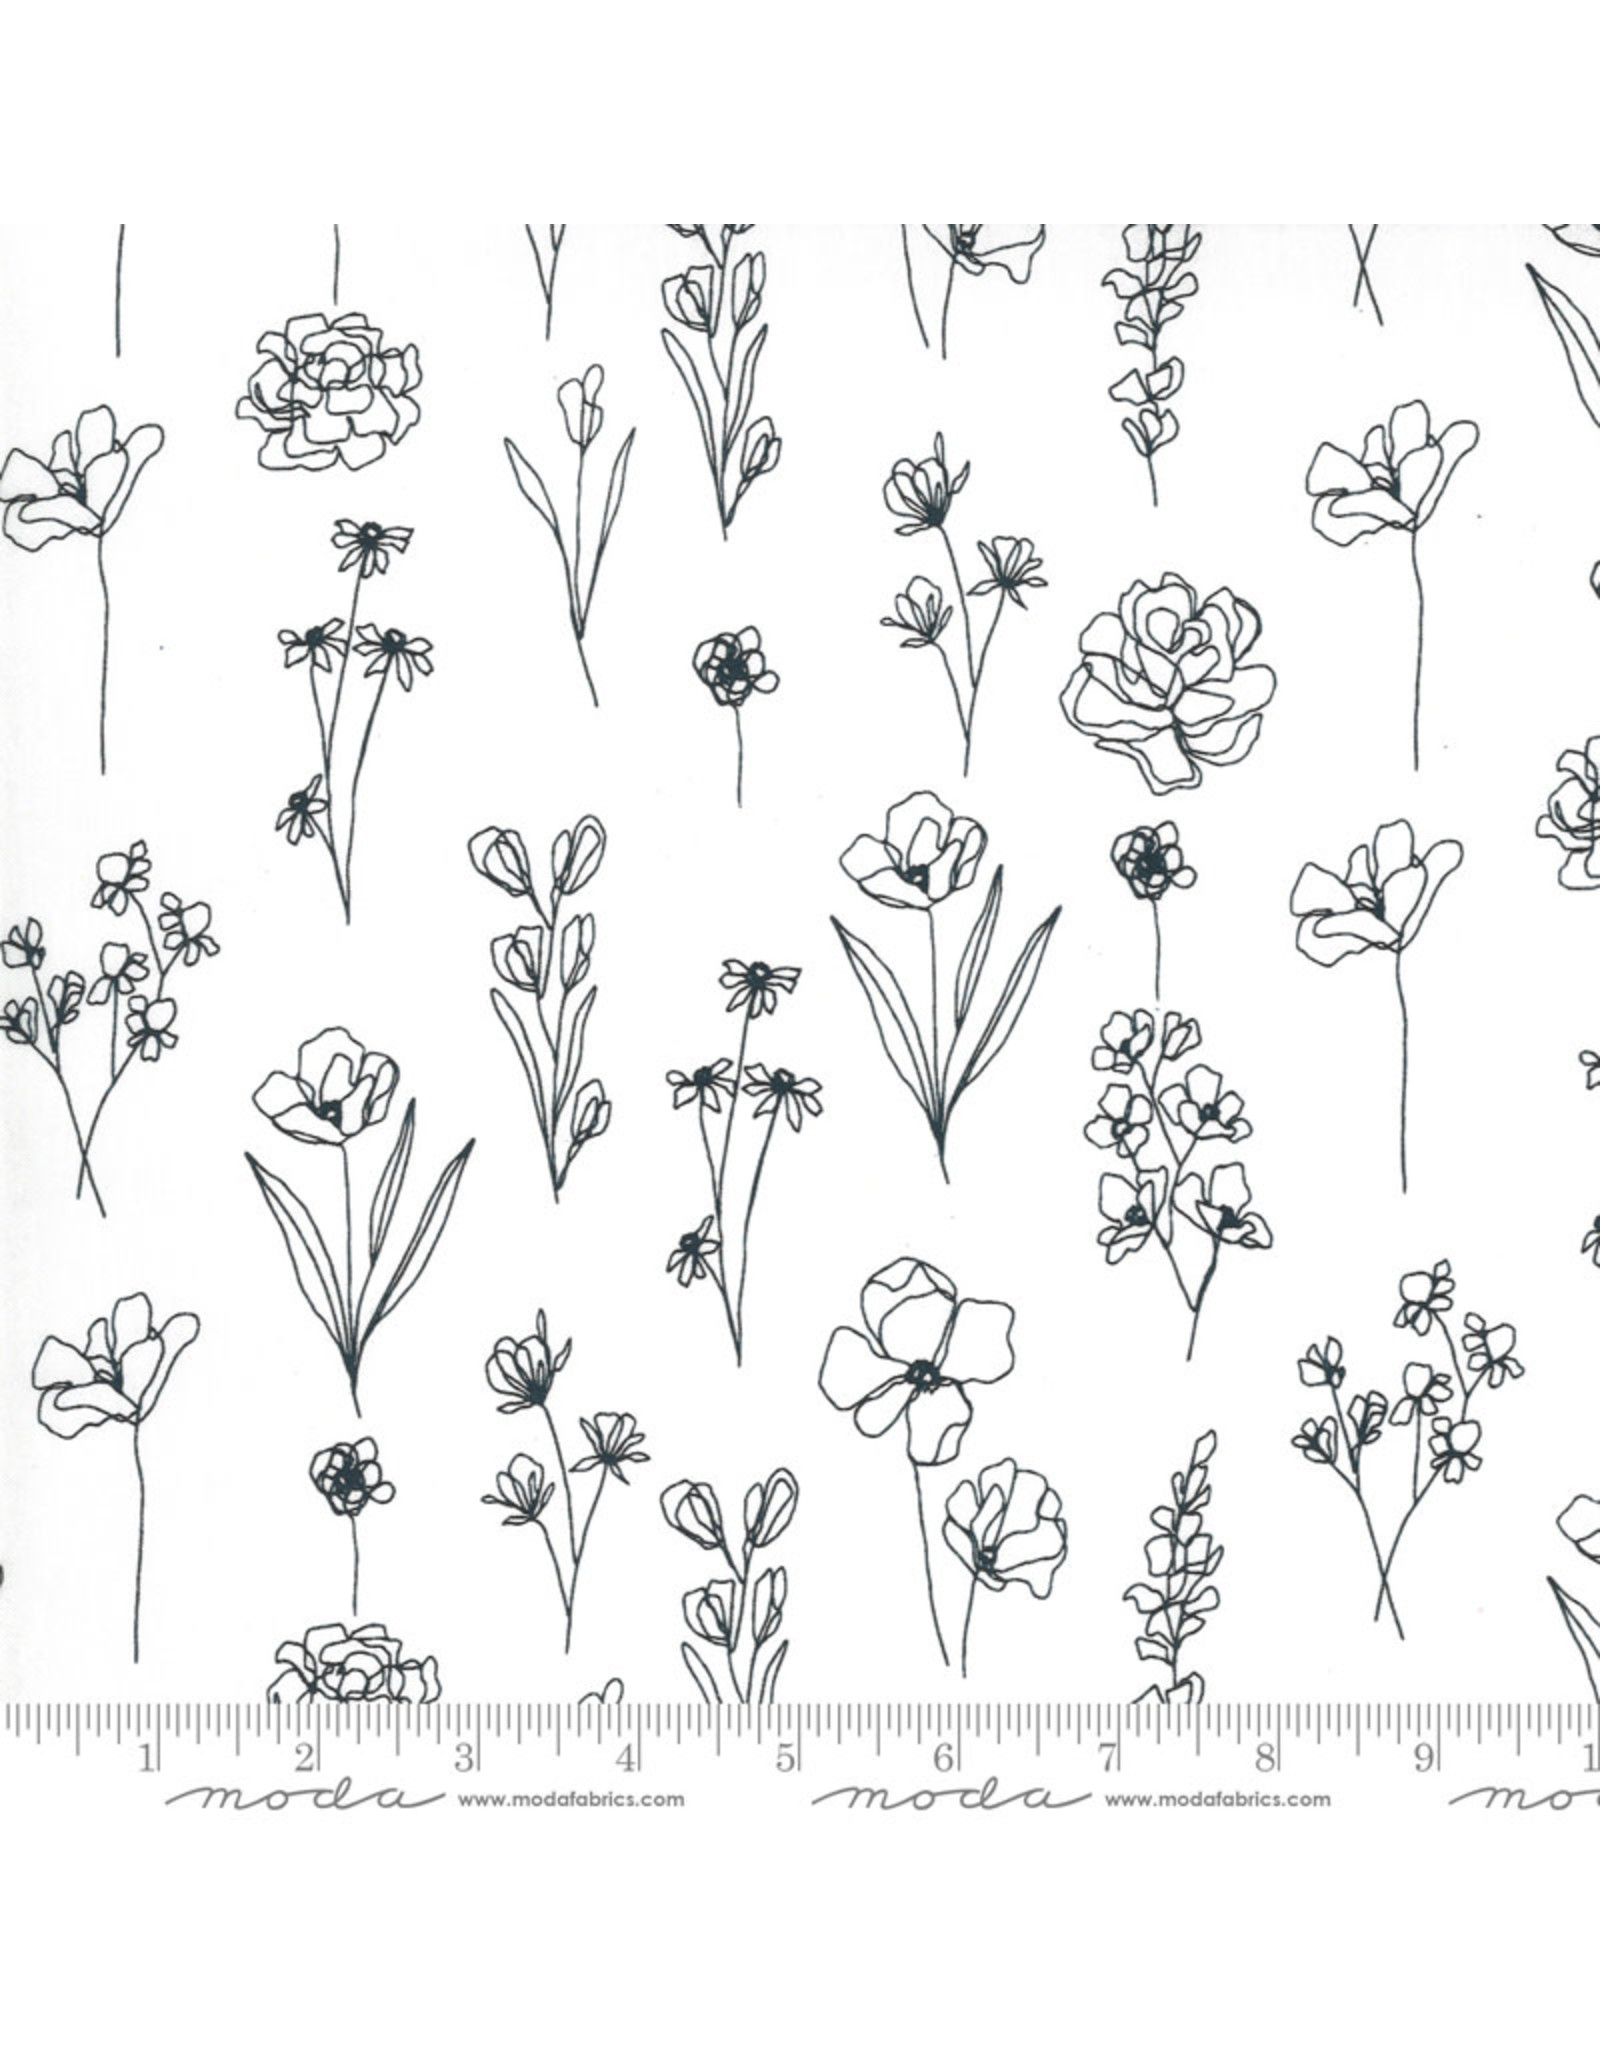 Moda Illustrations, Floral Doodle in Paper, Fabric Half-Yards